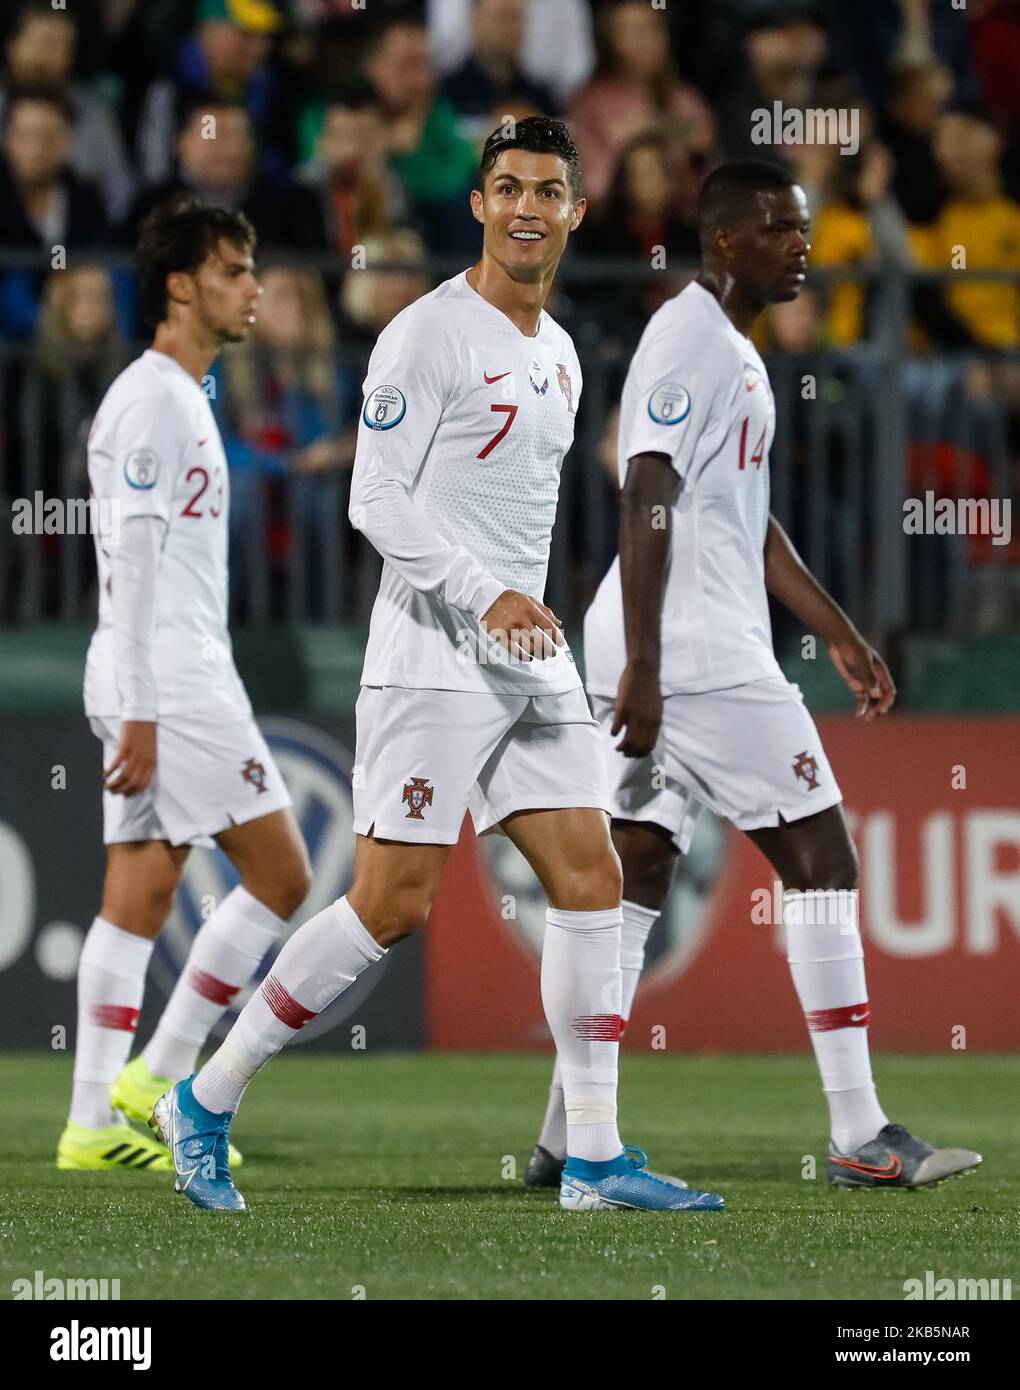 (L to R) Joao Felix, Cristiano Ronaldo and William Carvalho of Portugal during the UEFA Euro 2020 qualifying match between Lithuanua and Portugal on September 10, 2019 at LFF Stadium in Vilnius, Lithuania. (Photo by Mike Kireev/NurPhoto) Stock Photo